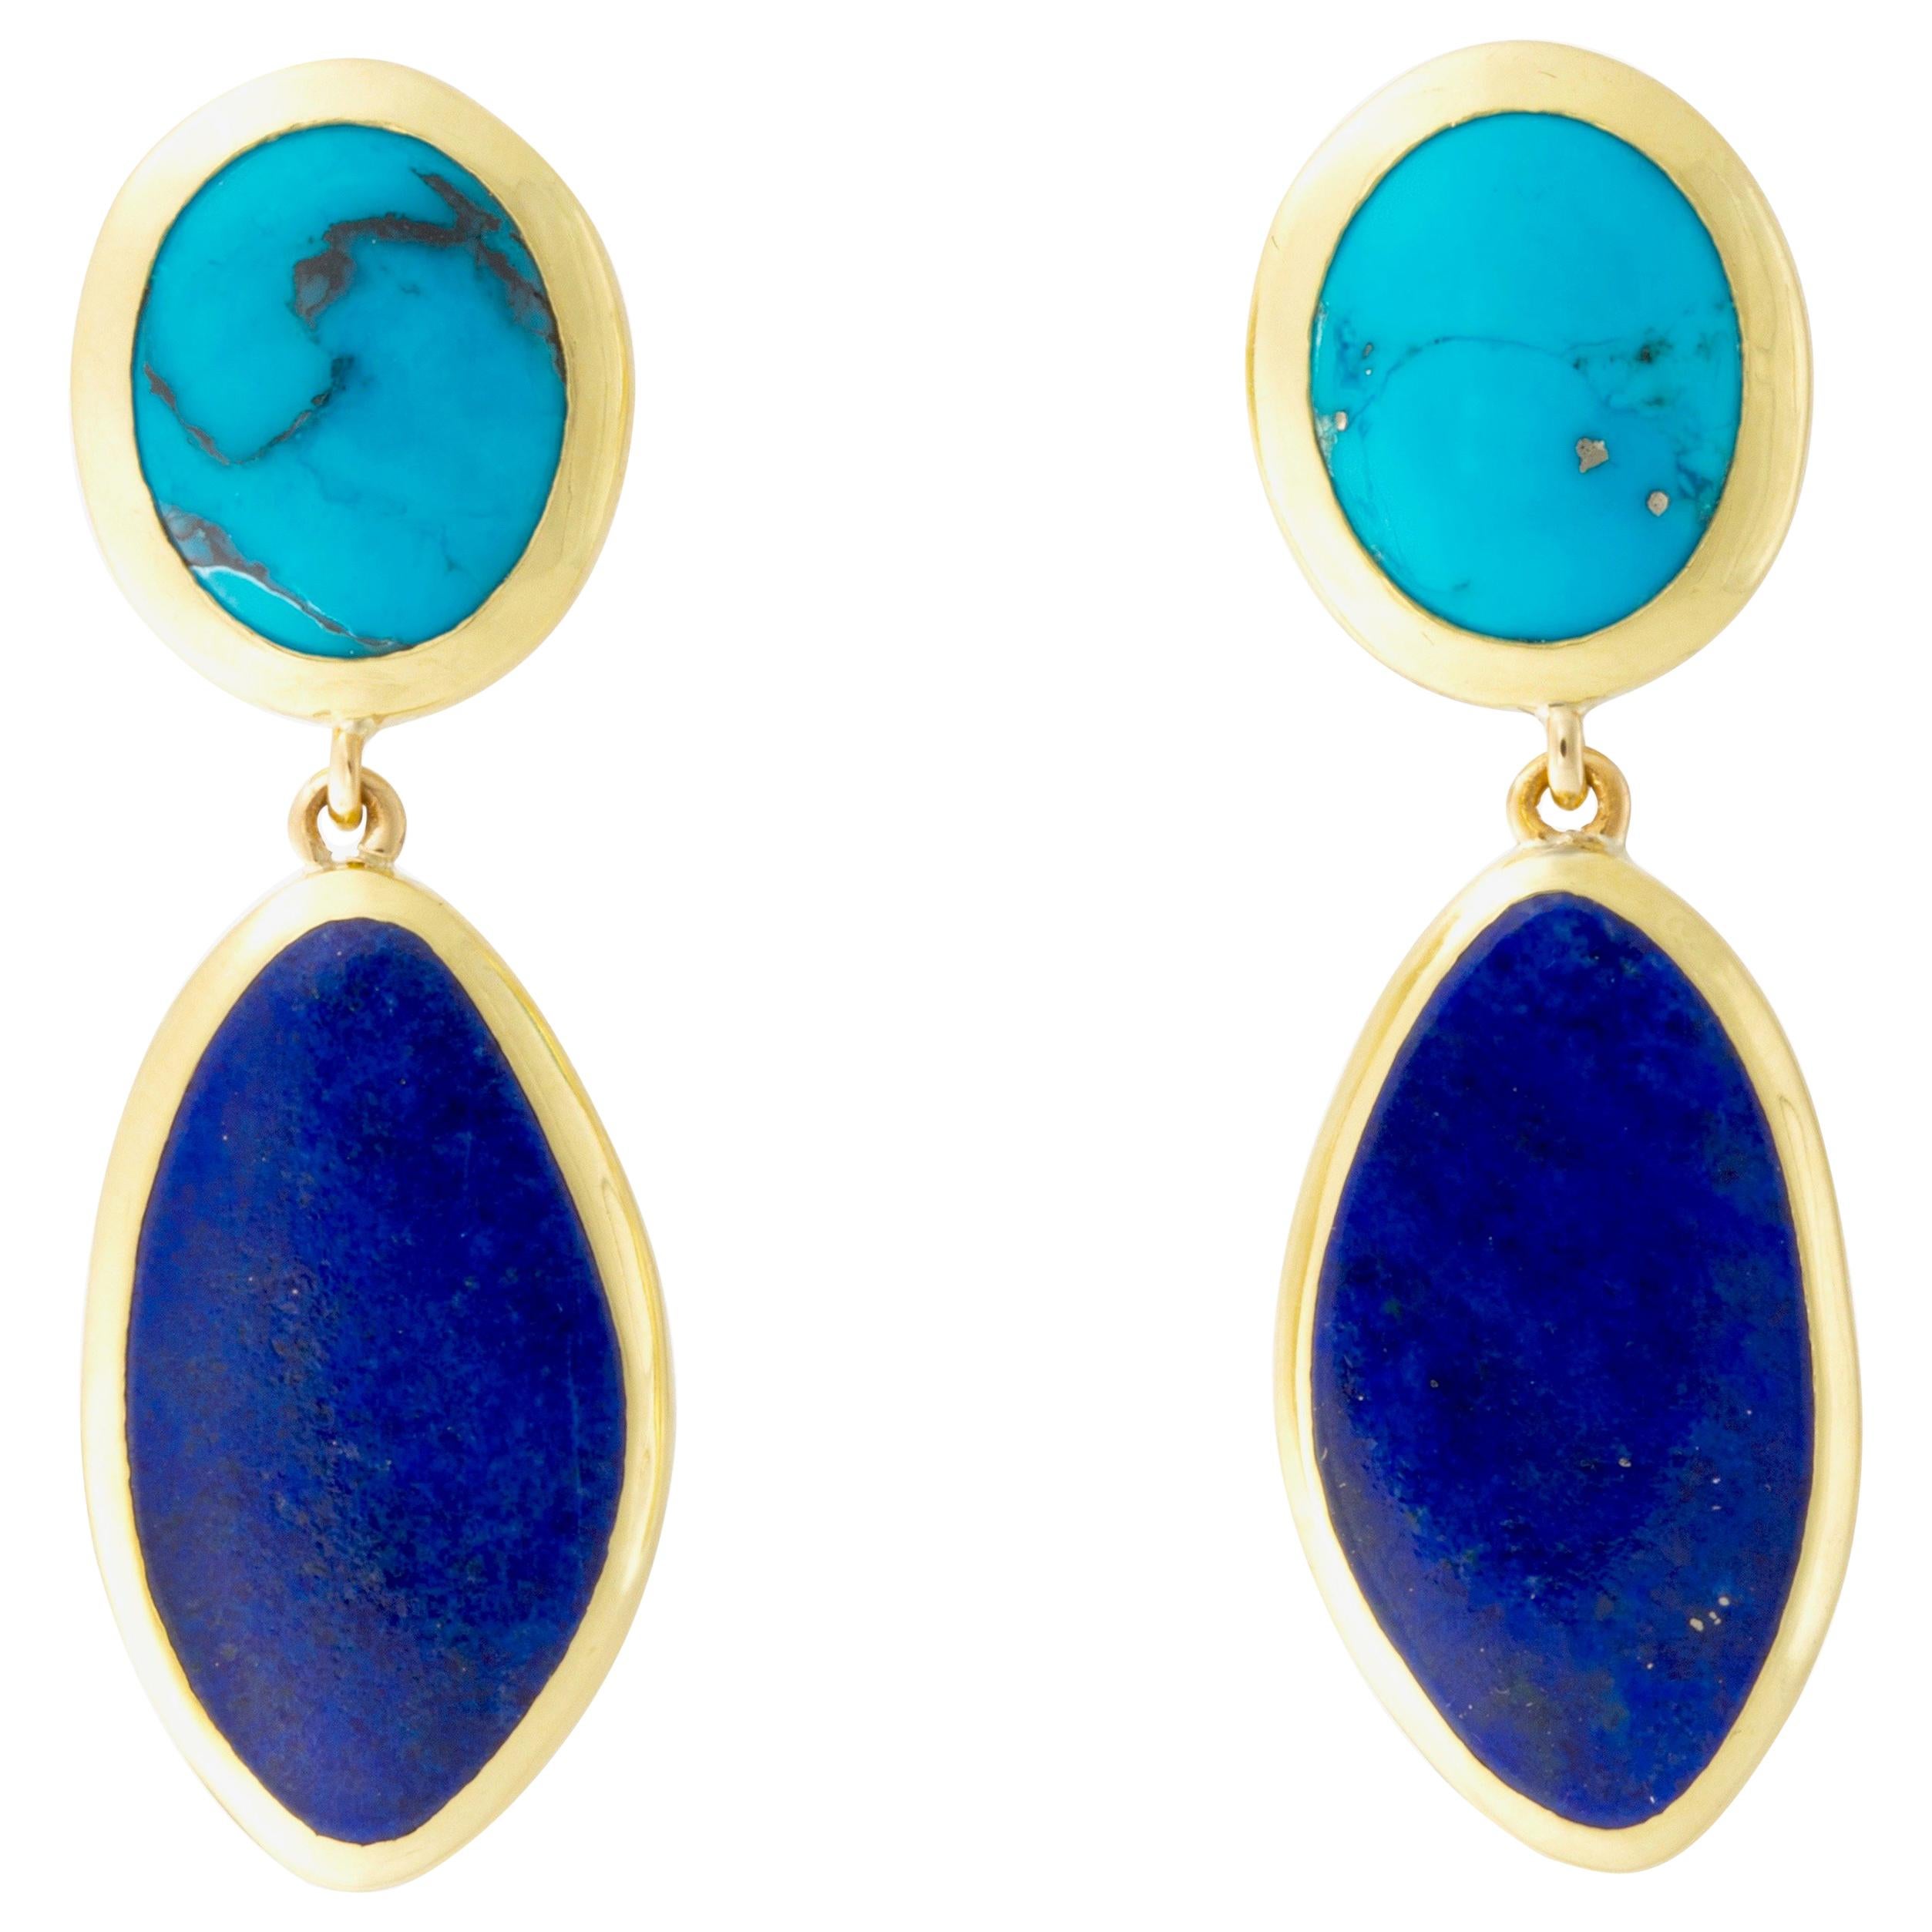 Turquoise and Lapis Earrings in 18 Karat Gold